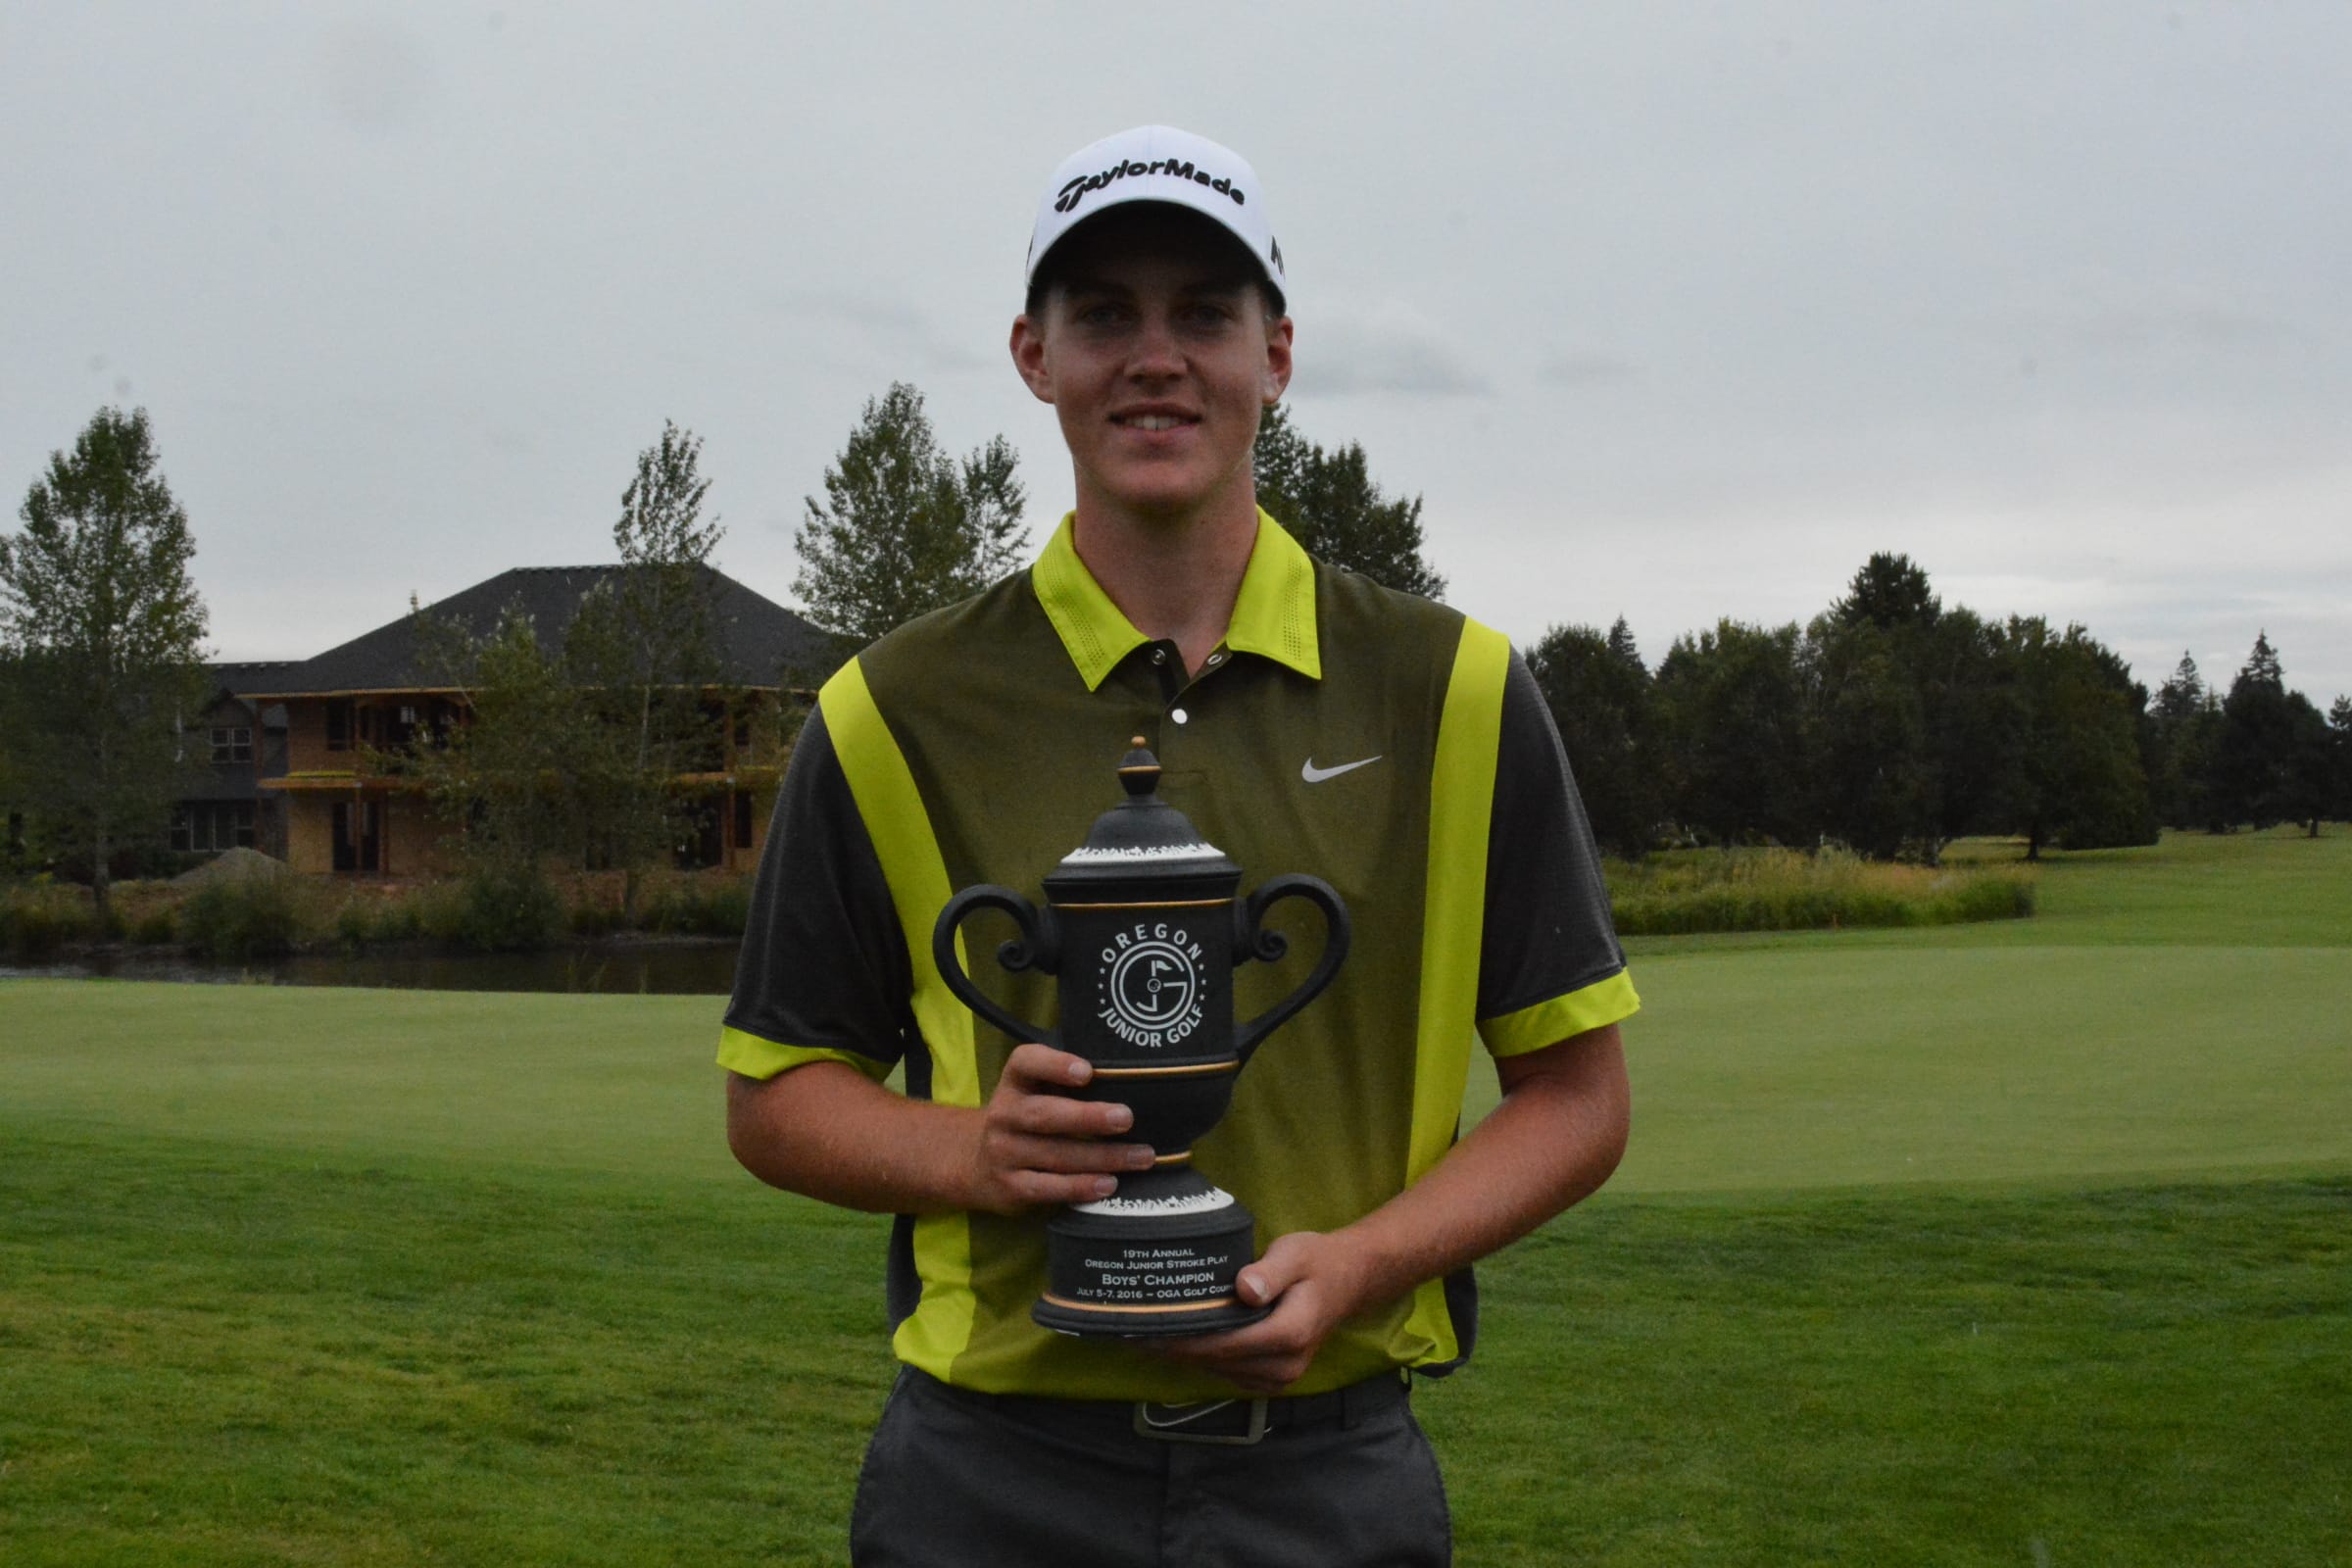 Vancouver golfer Spencer Tibbits after winnings the Oregon Junior Stroke Play Championship on Thursday in Woodburn.